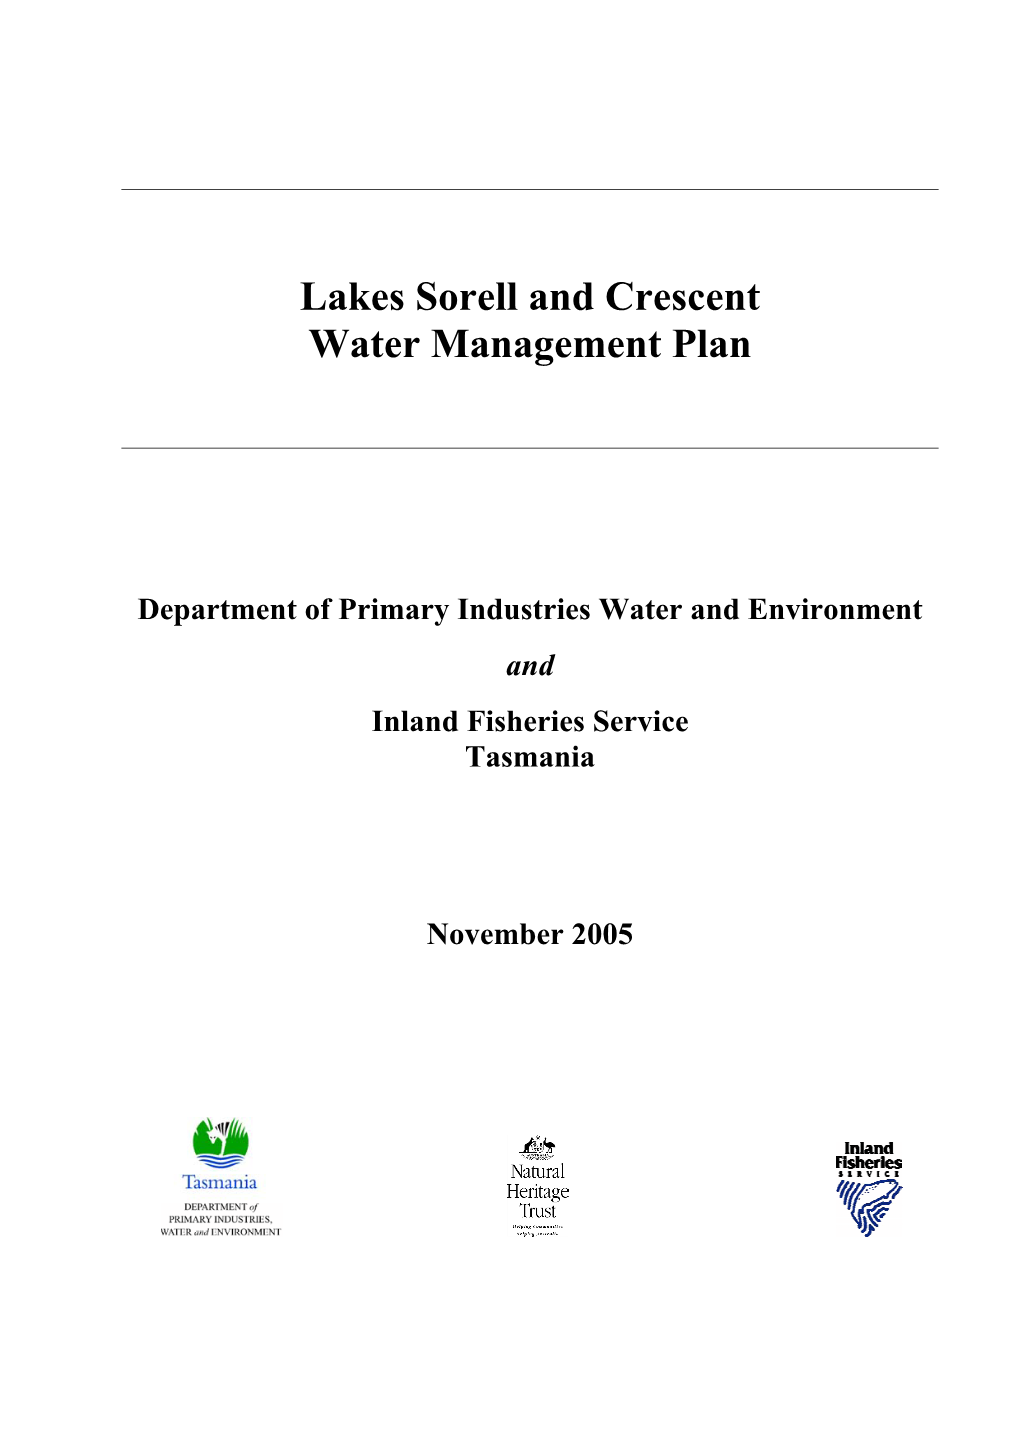 Lakes Sorell and Crescent Water Management Plan